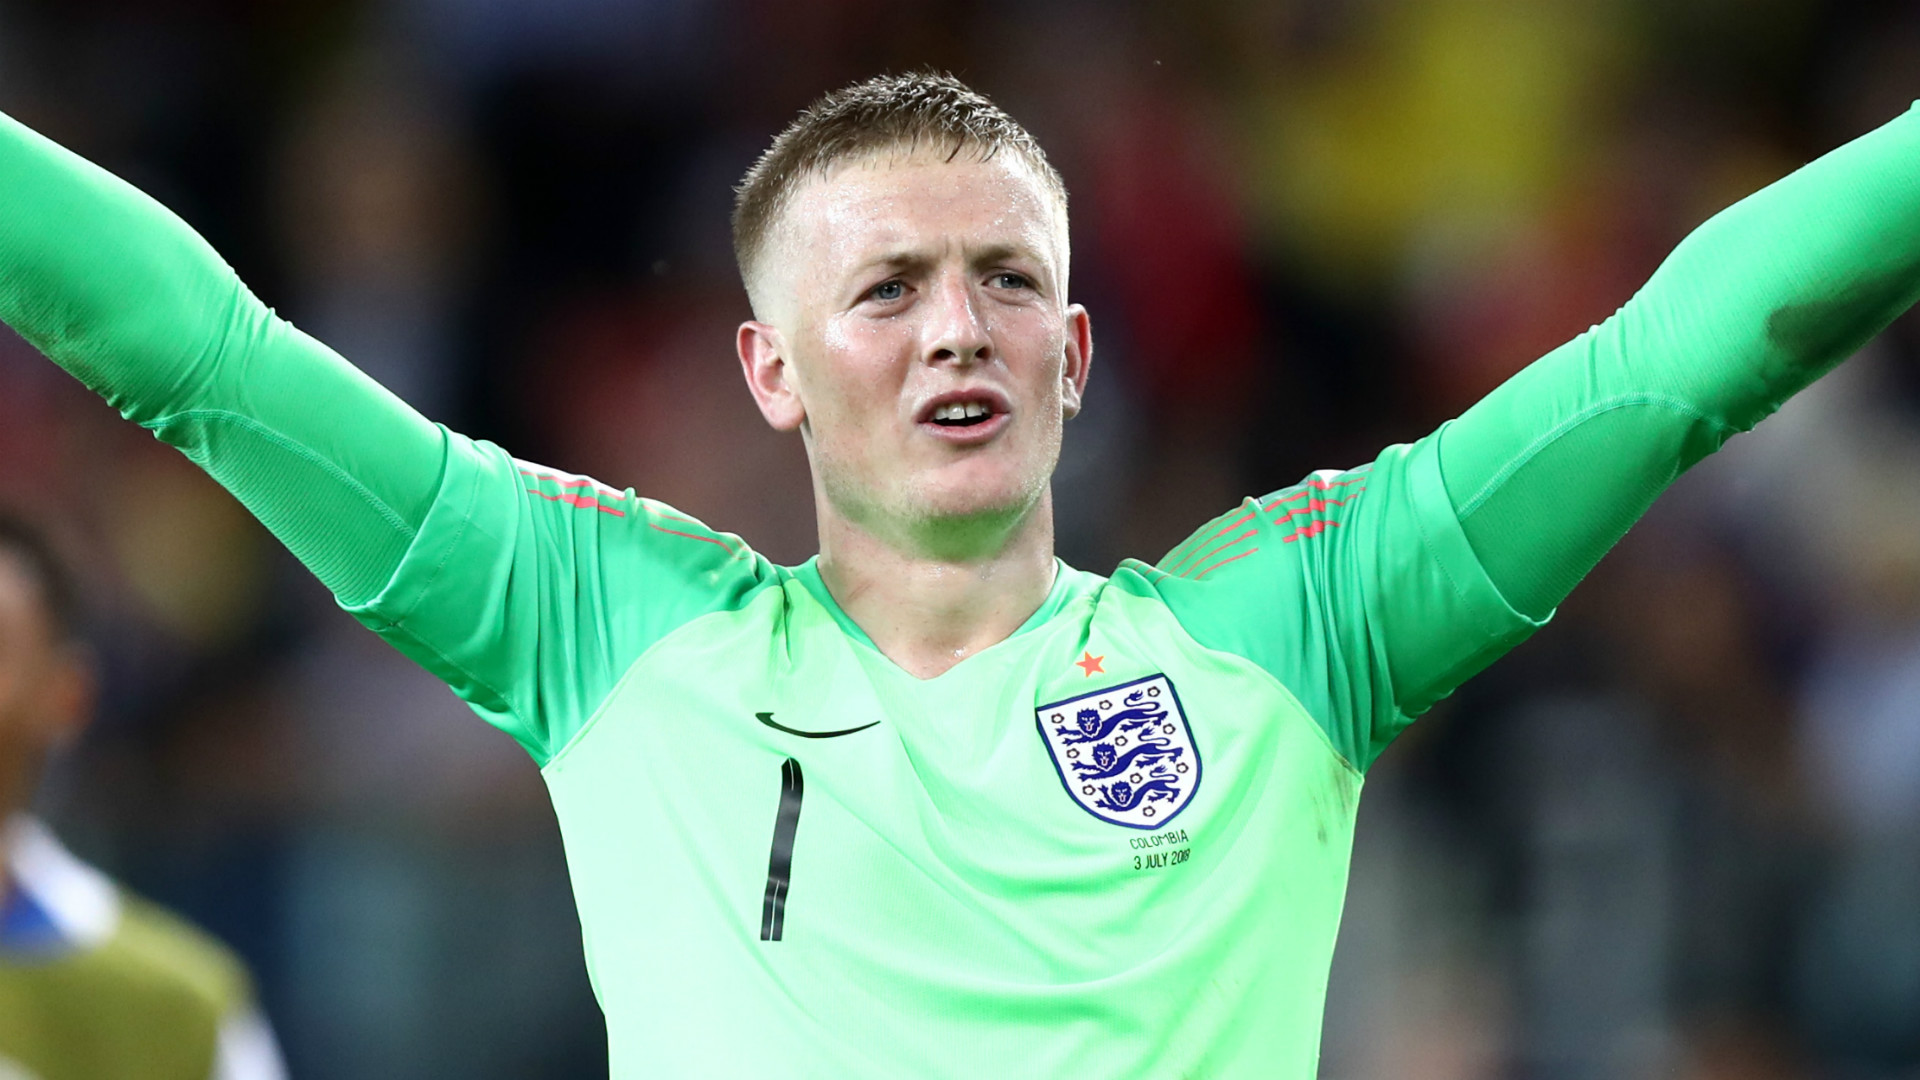 Everton yet to sign-off contract deal for Chelsea target Jordan Pickford.